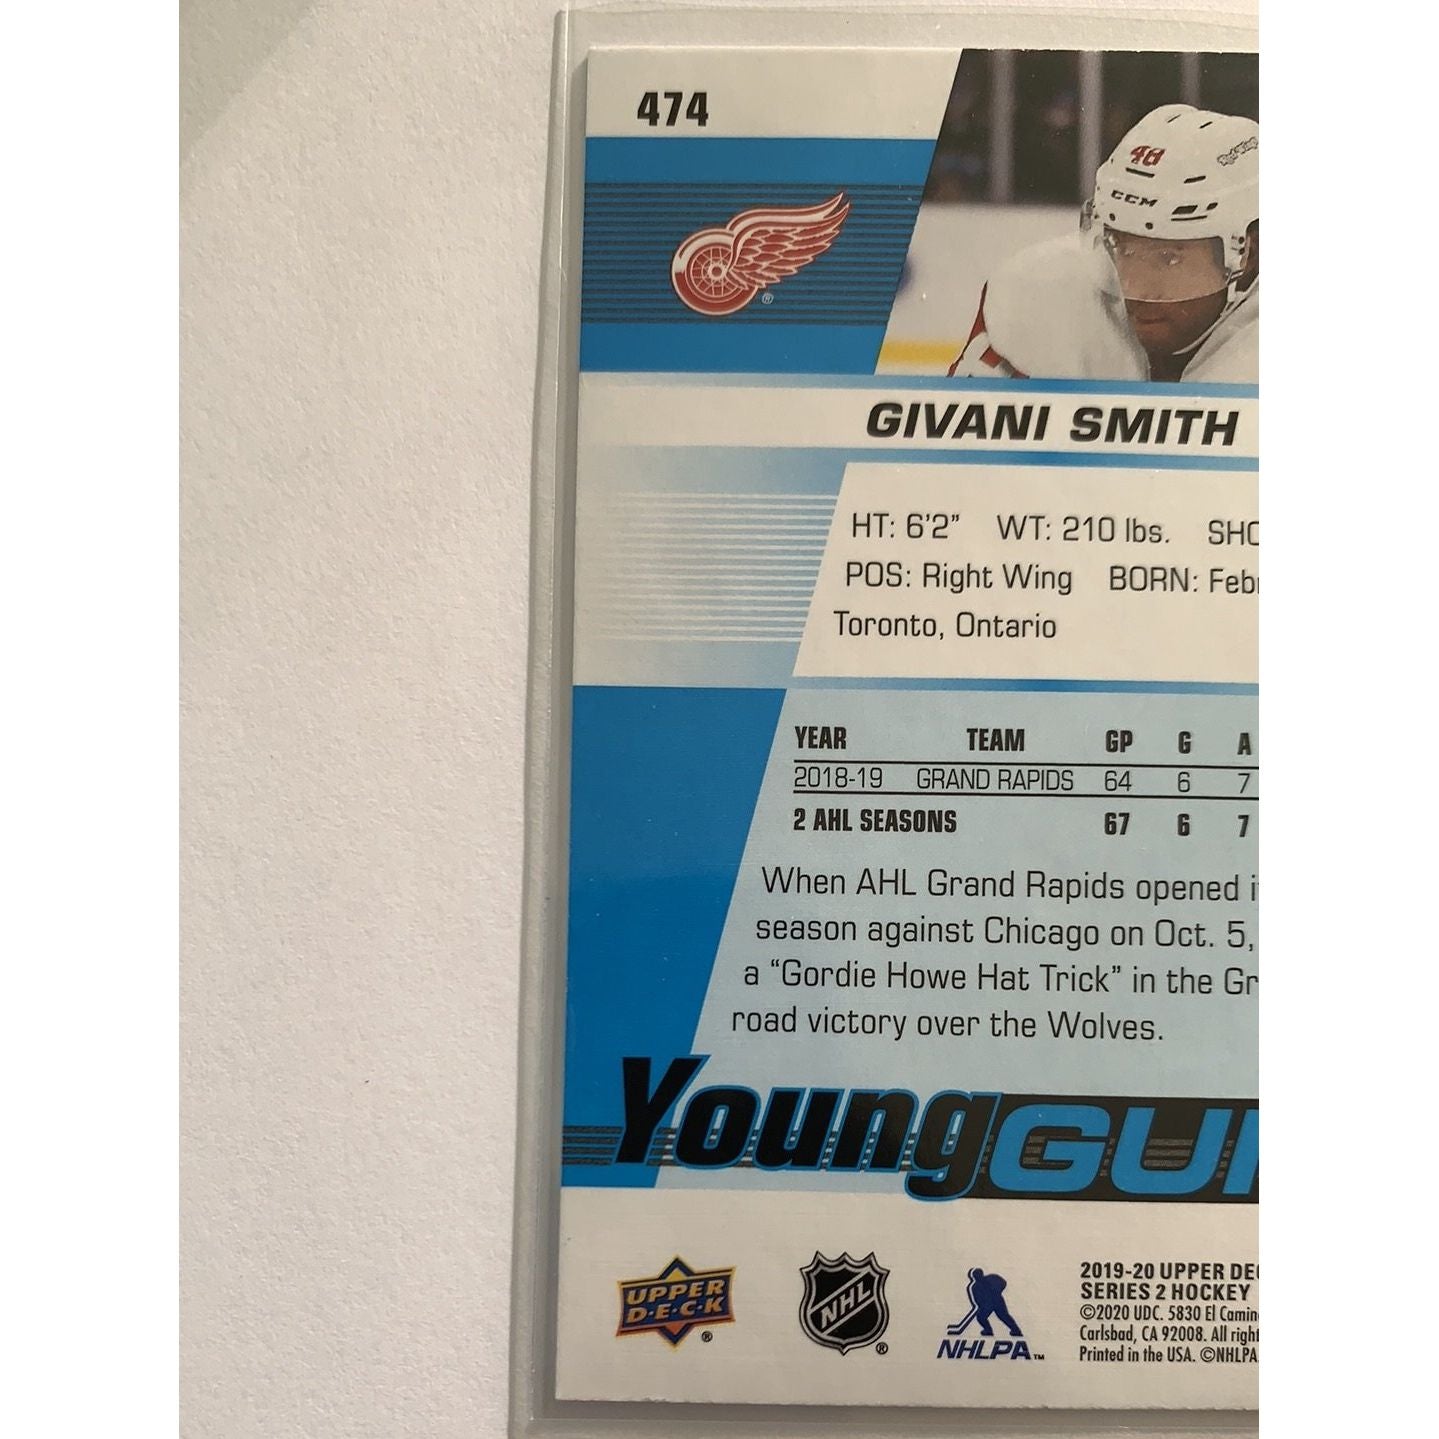  2019-20 Upper Deck Series 2 Givani Smith Young Guns  Local Legends Cards & Collectibles